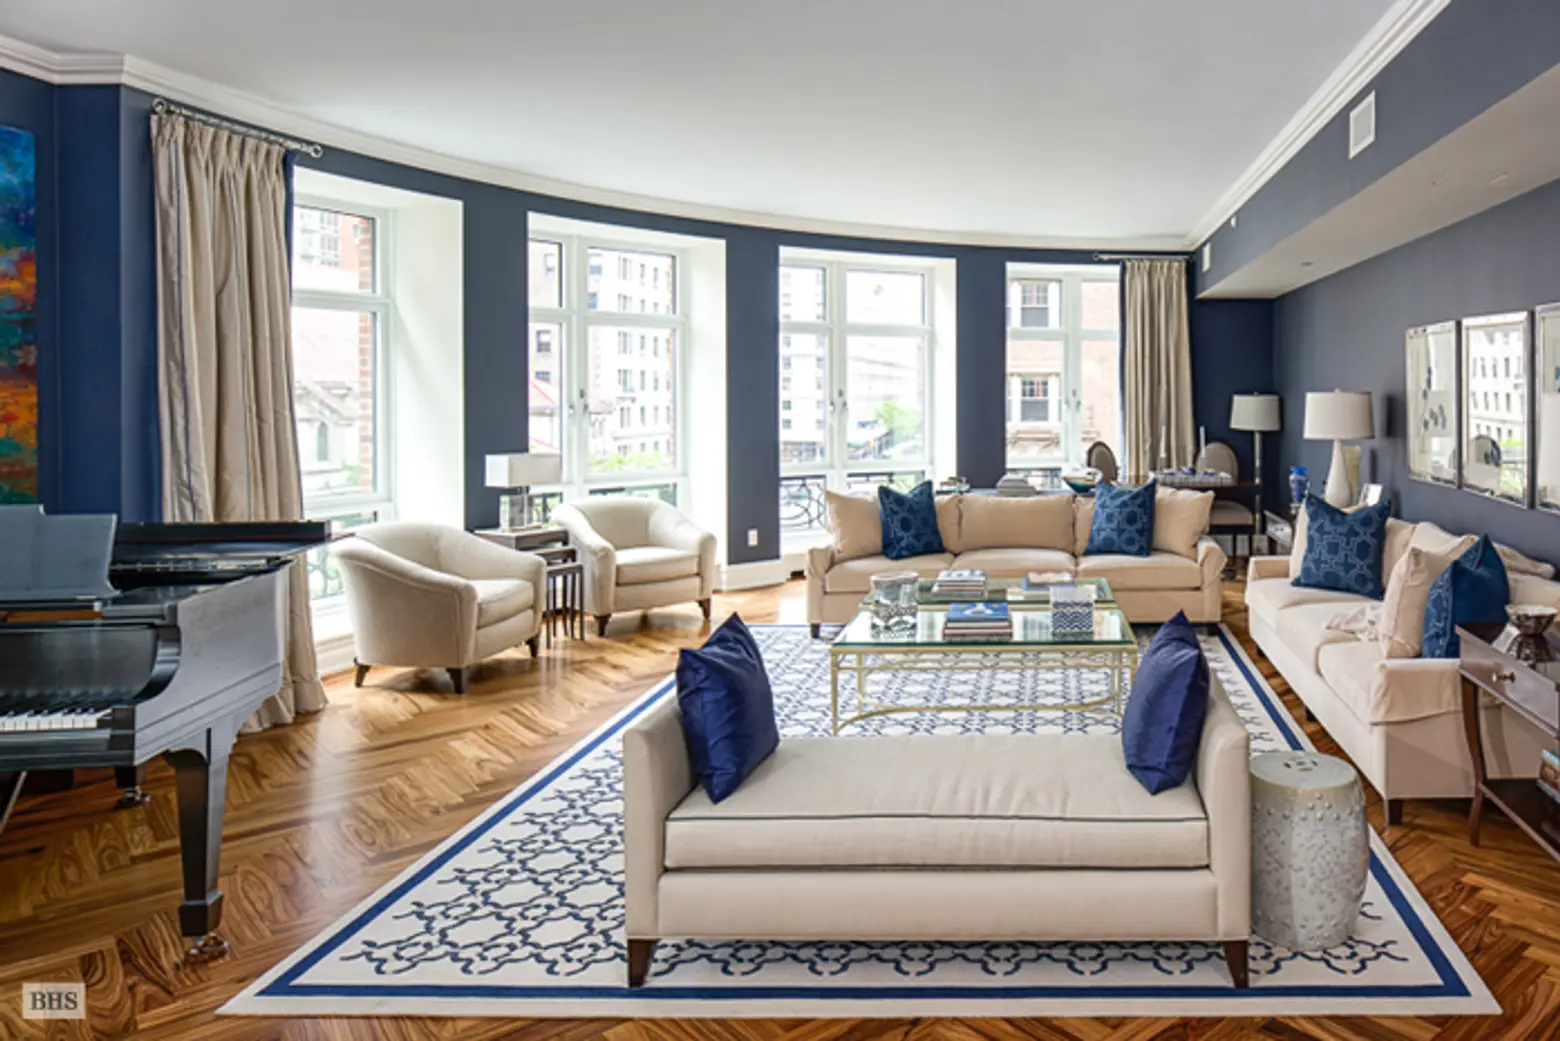 Even Without Matt Damon as a Neighbor, This Upper West Side Condo Gets Top Billing